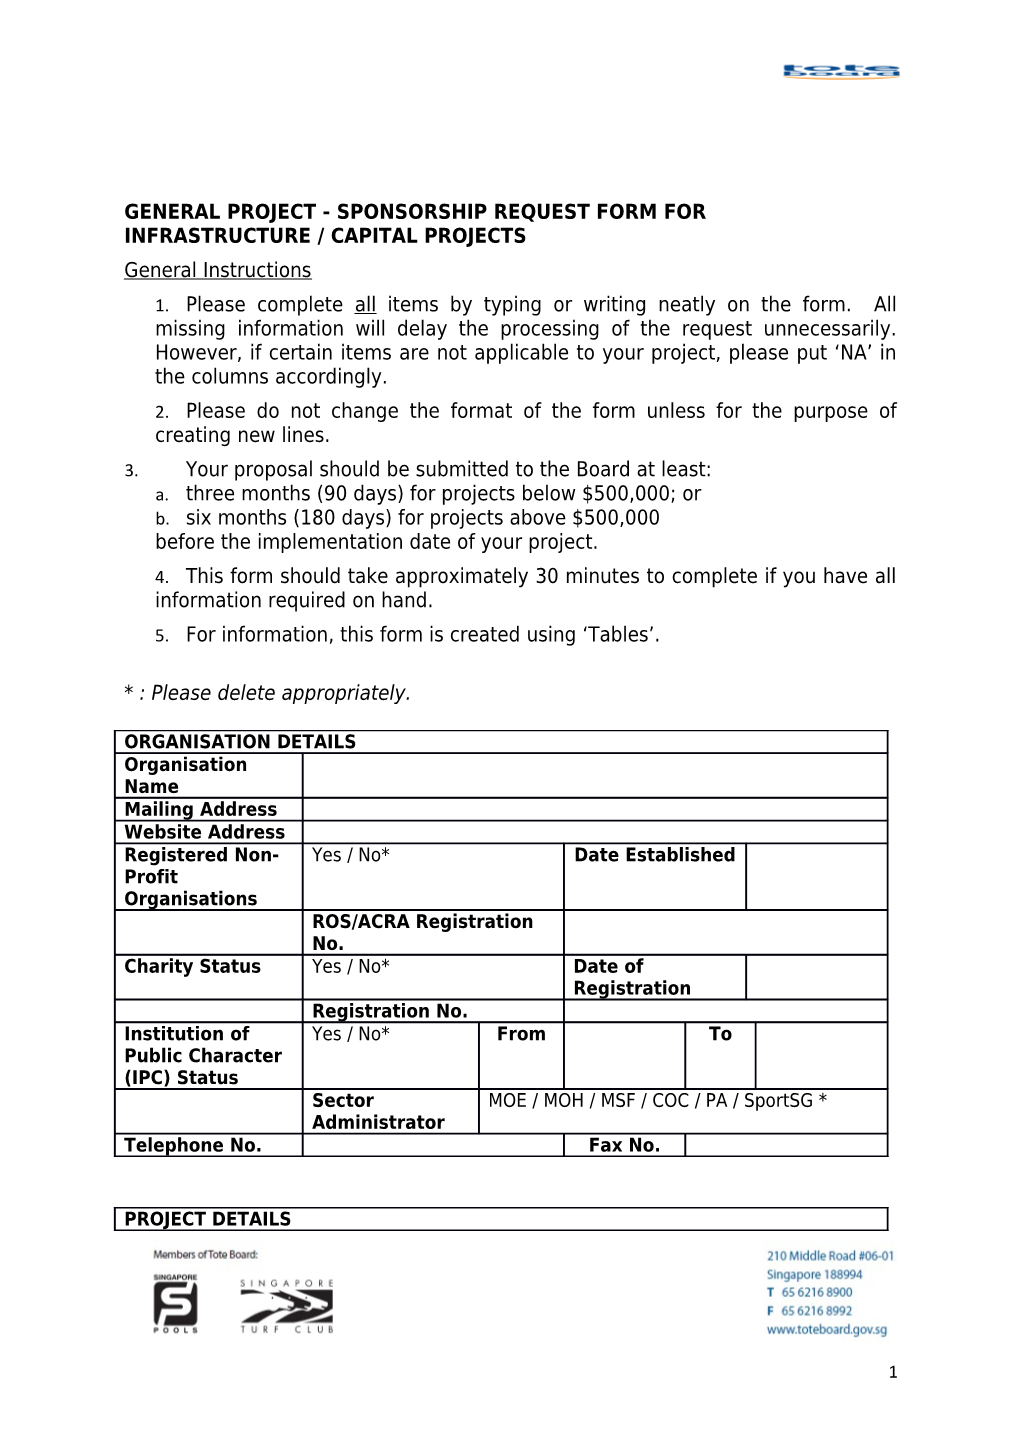 General Project - Sponsorship Request Form for Infrastructure / Capital Projects